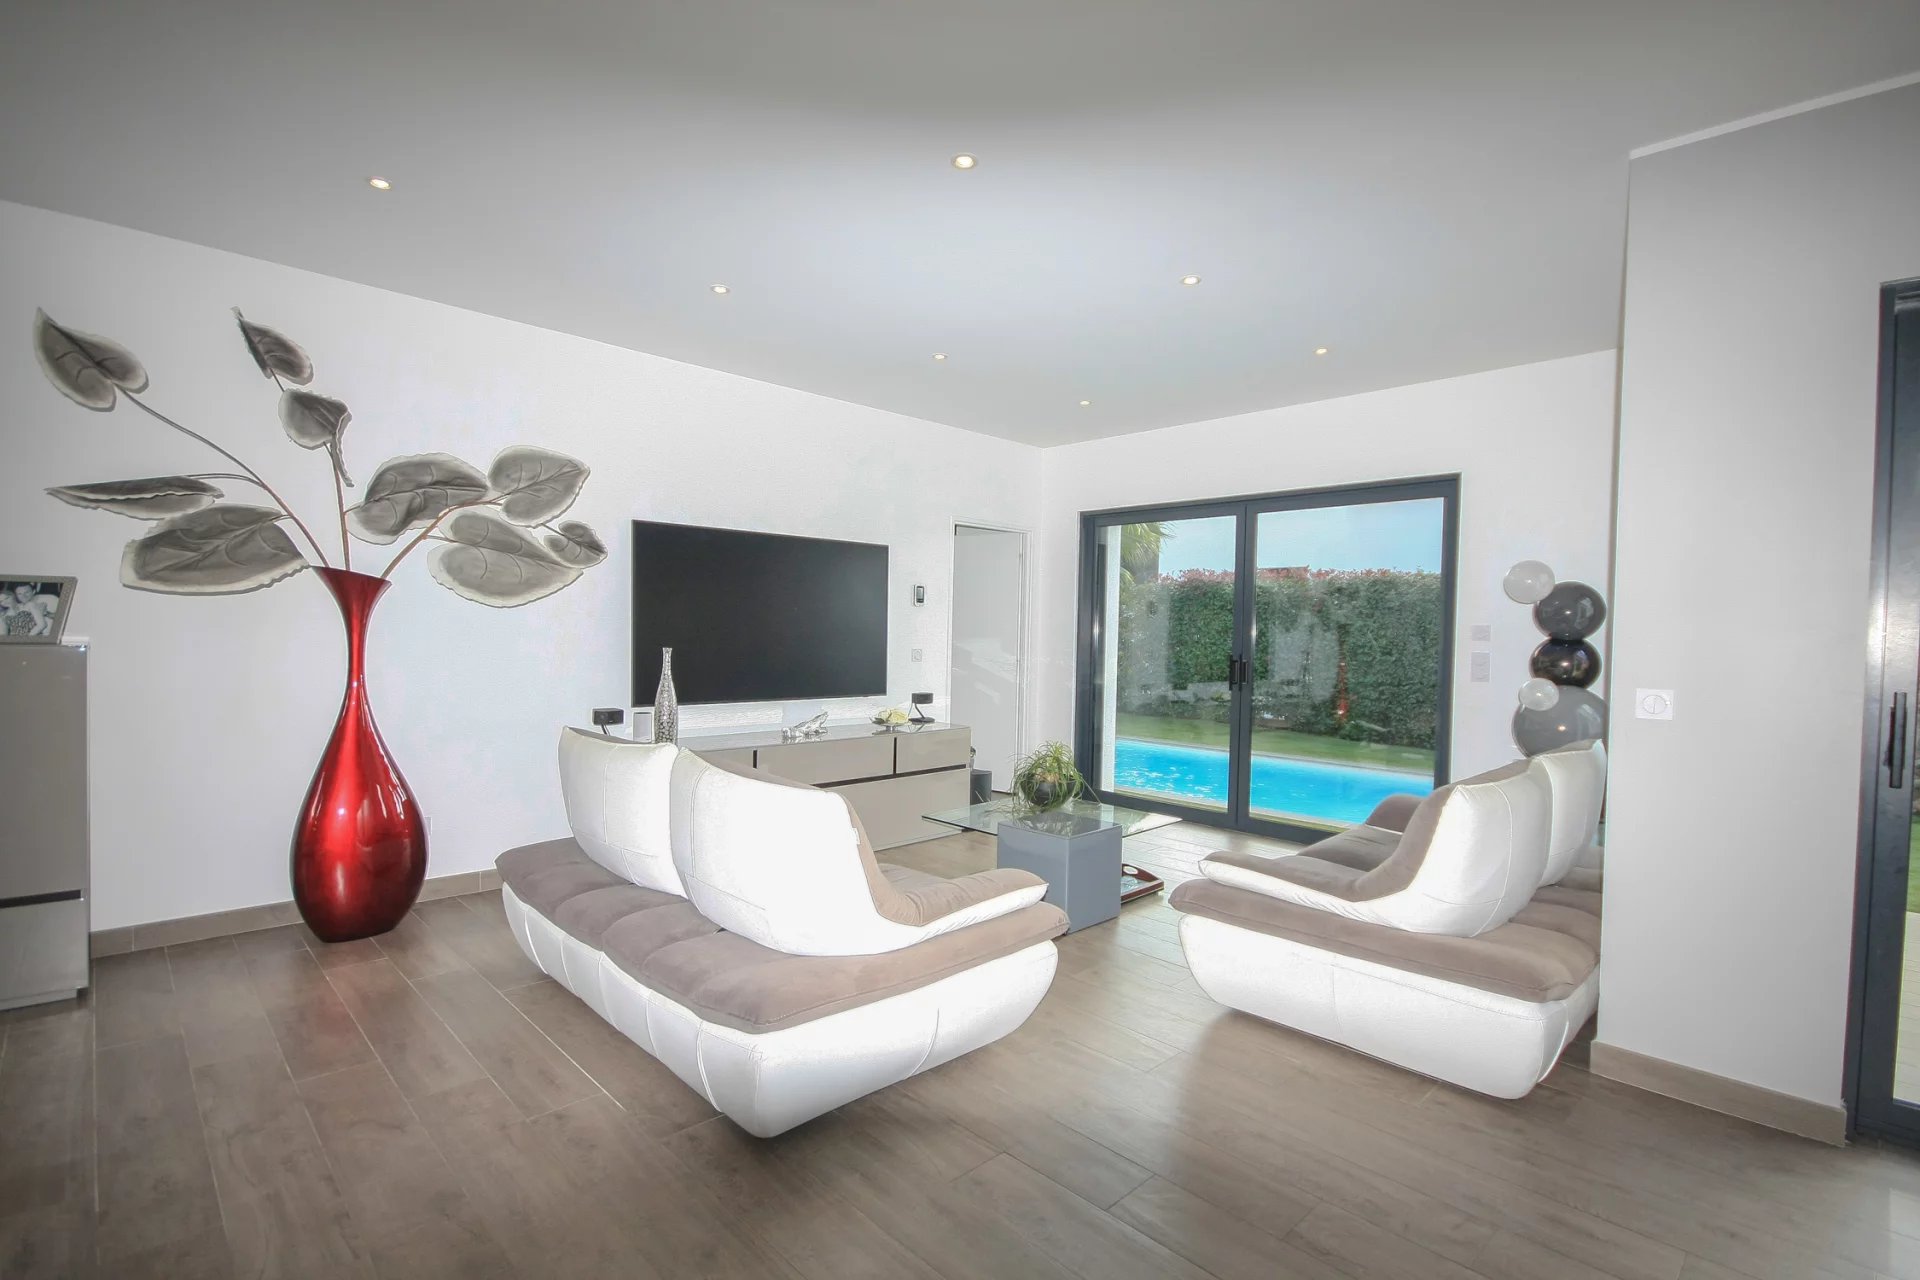 CONTEMPORARY VILLA WITH POOL AT SAINT RAPHAEL 10 mn driving FROM THE SEA